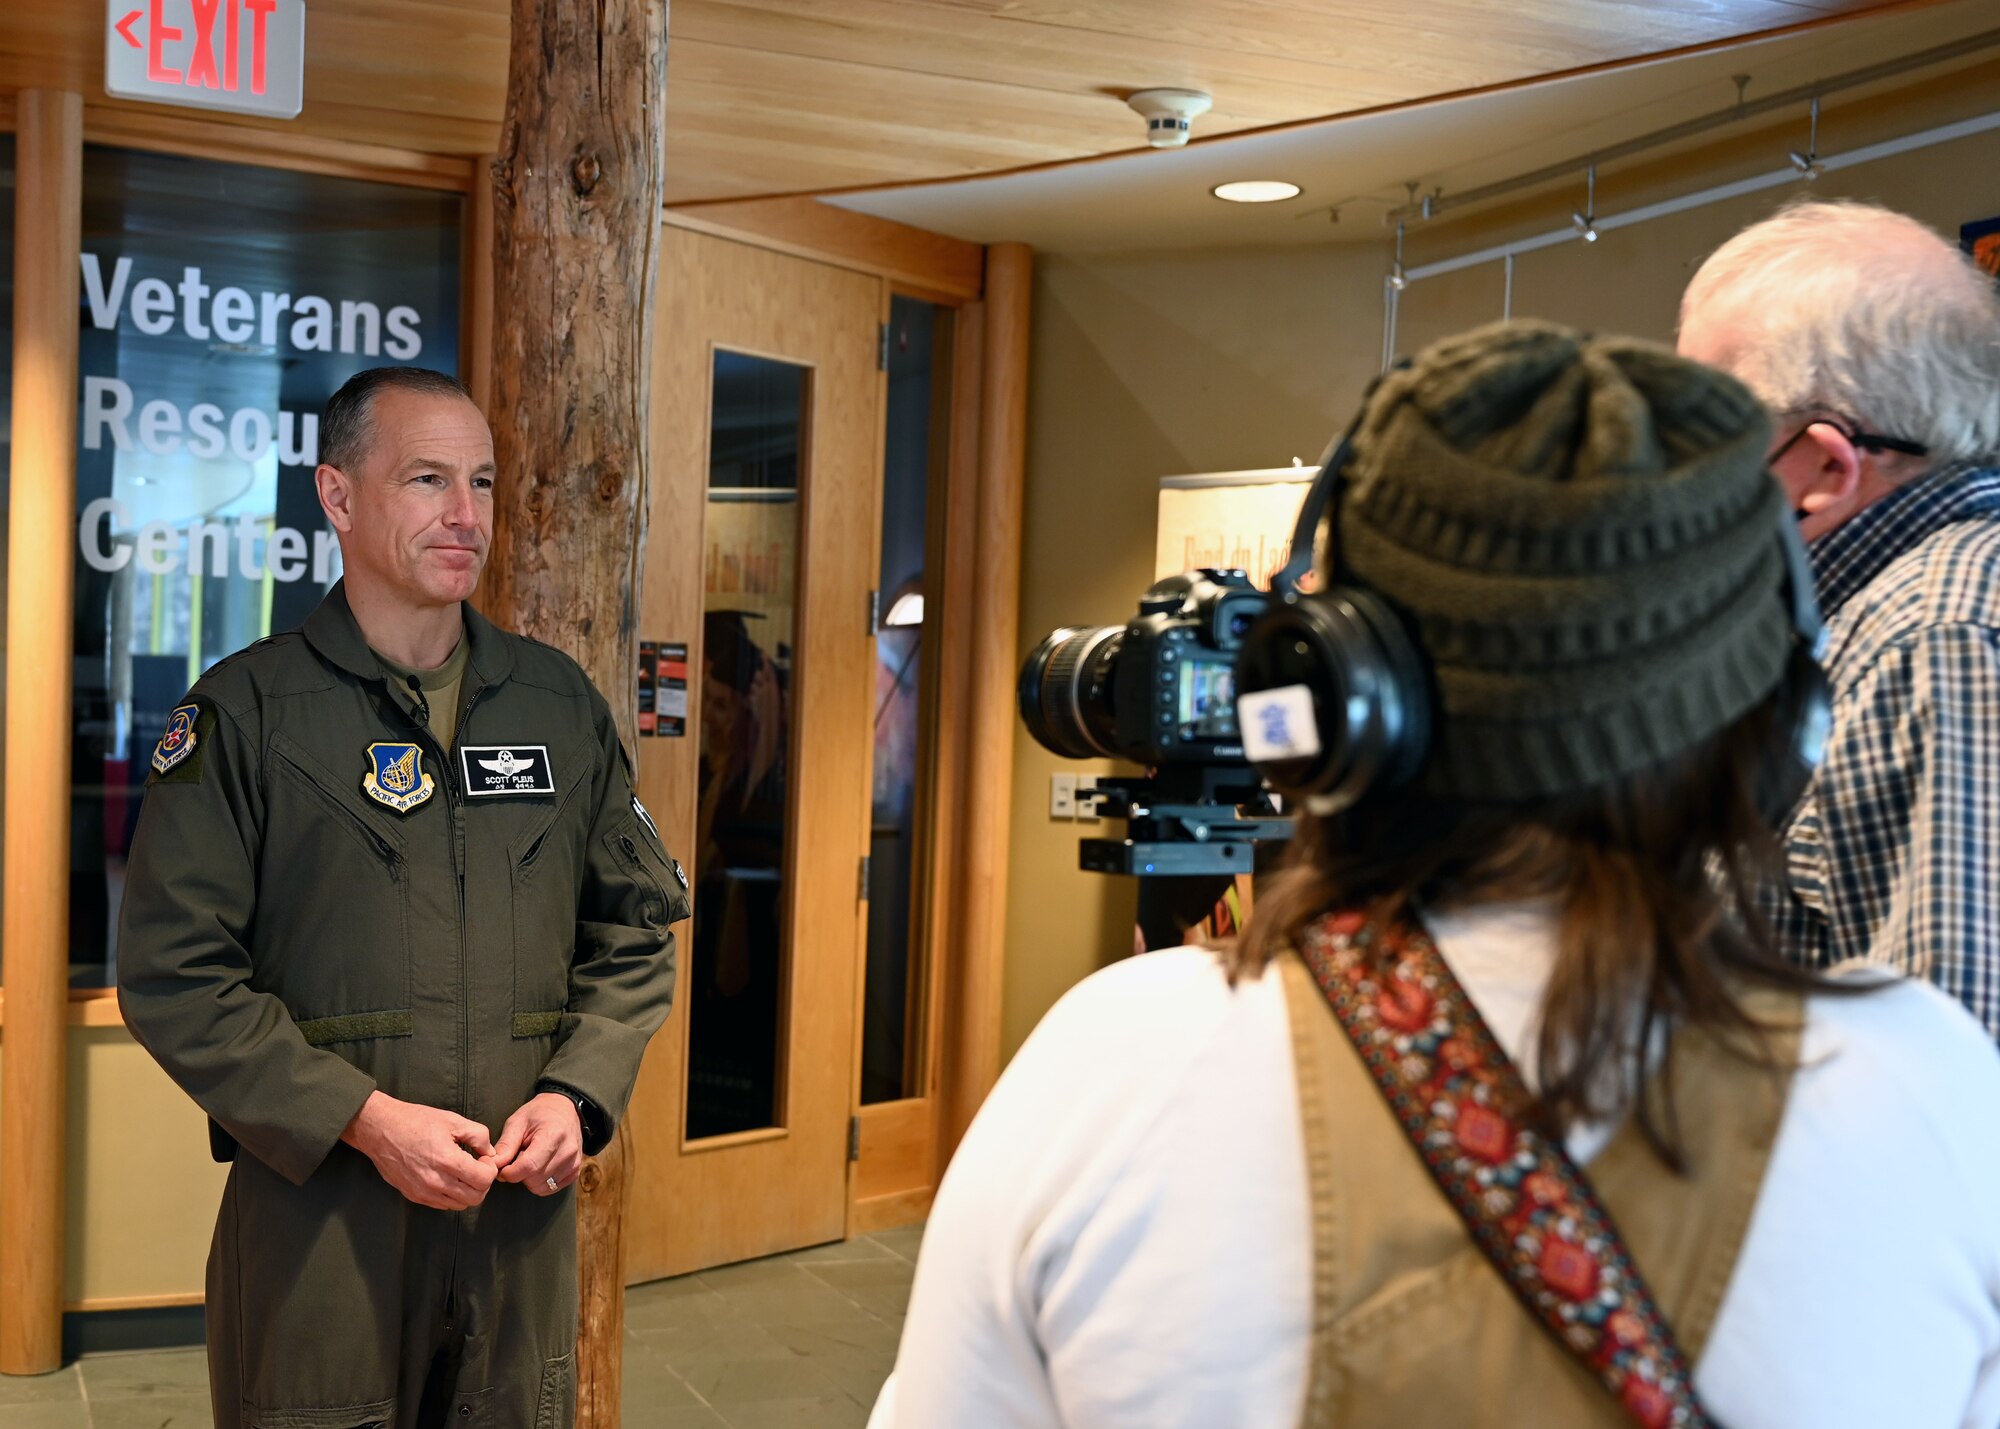 Lt. Gen. Scott L. Pleus, Seventh Air Force commander, is interviewed by a student at the Fond Du Lac Tribal and Community College in Cloquet, Minn., March 9, 2022. Pleus visited the school and talked about the importance of diversity in the Air Force and how every Airman brings unique perspectives that help accomplish the mission. (U.S. Air Force photo by Tech. Sgt. Jessica Kind/Released)